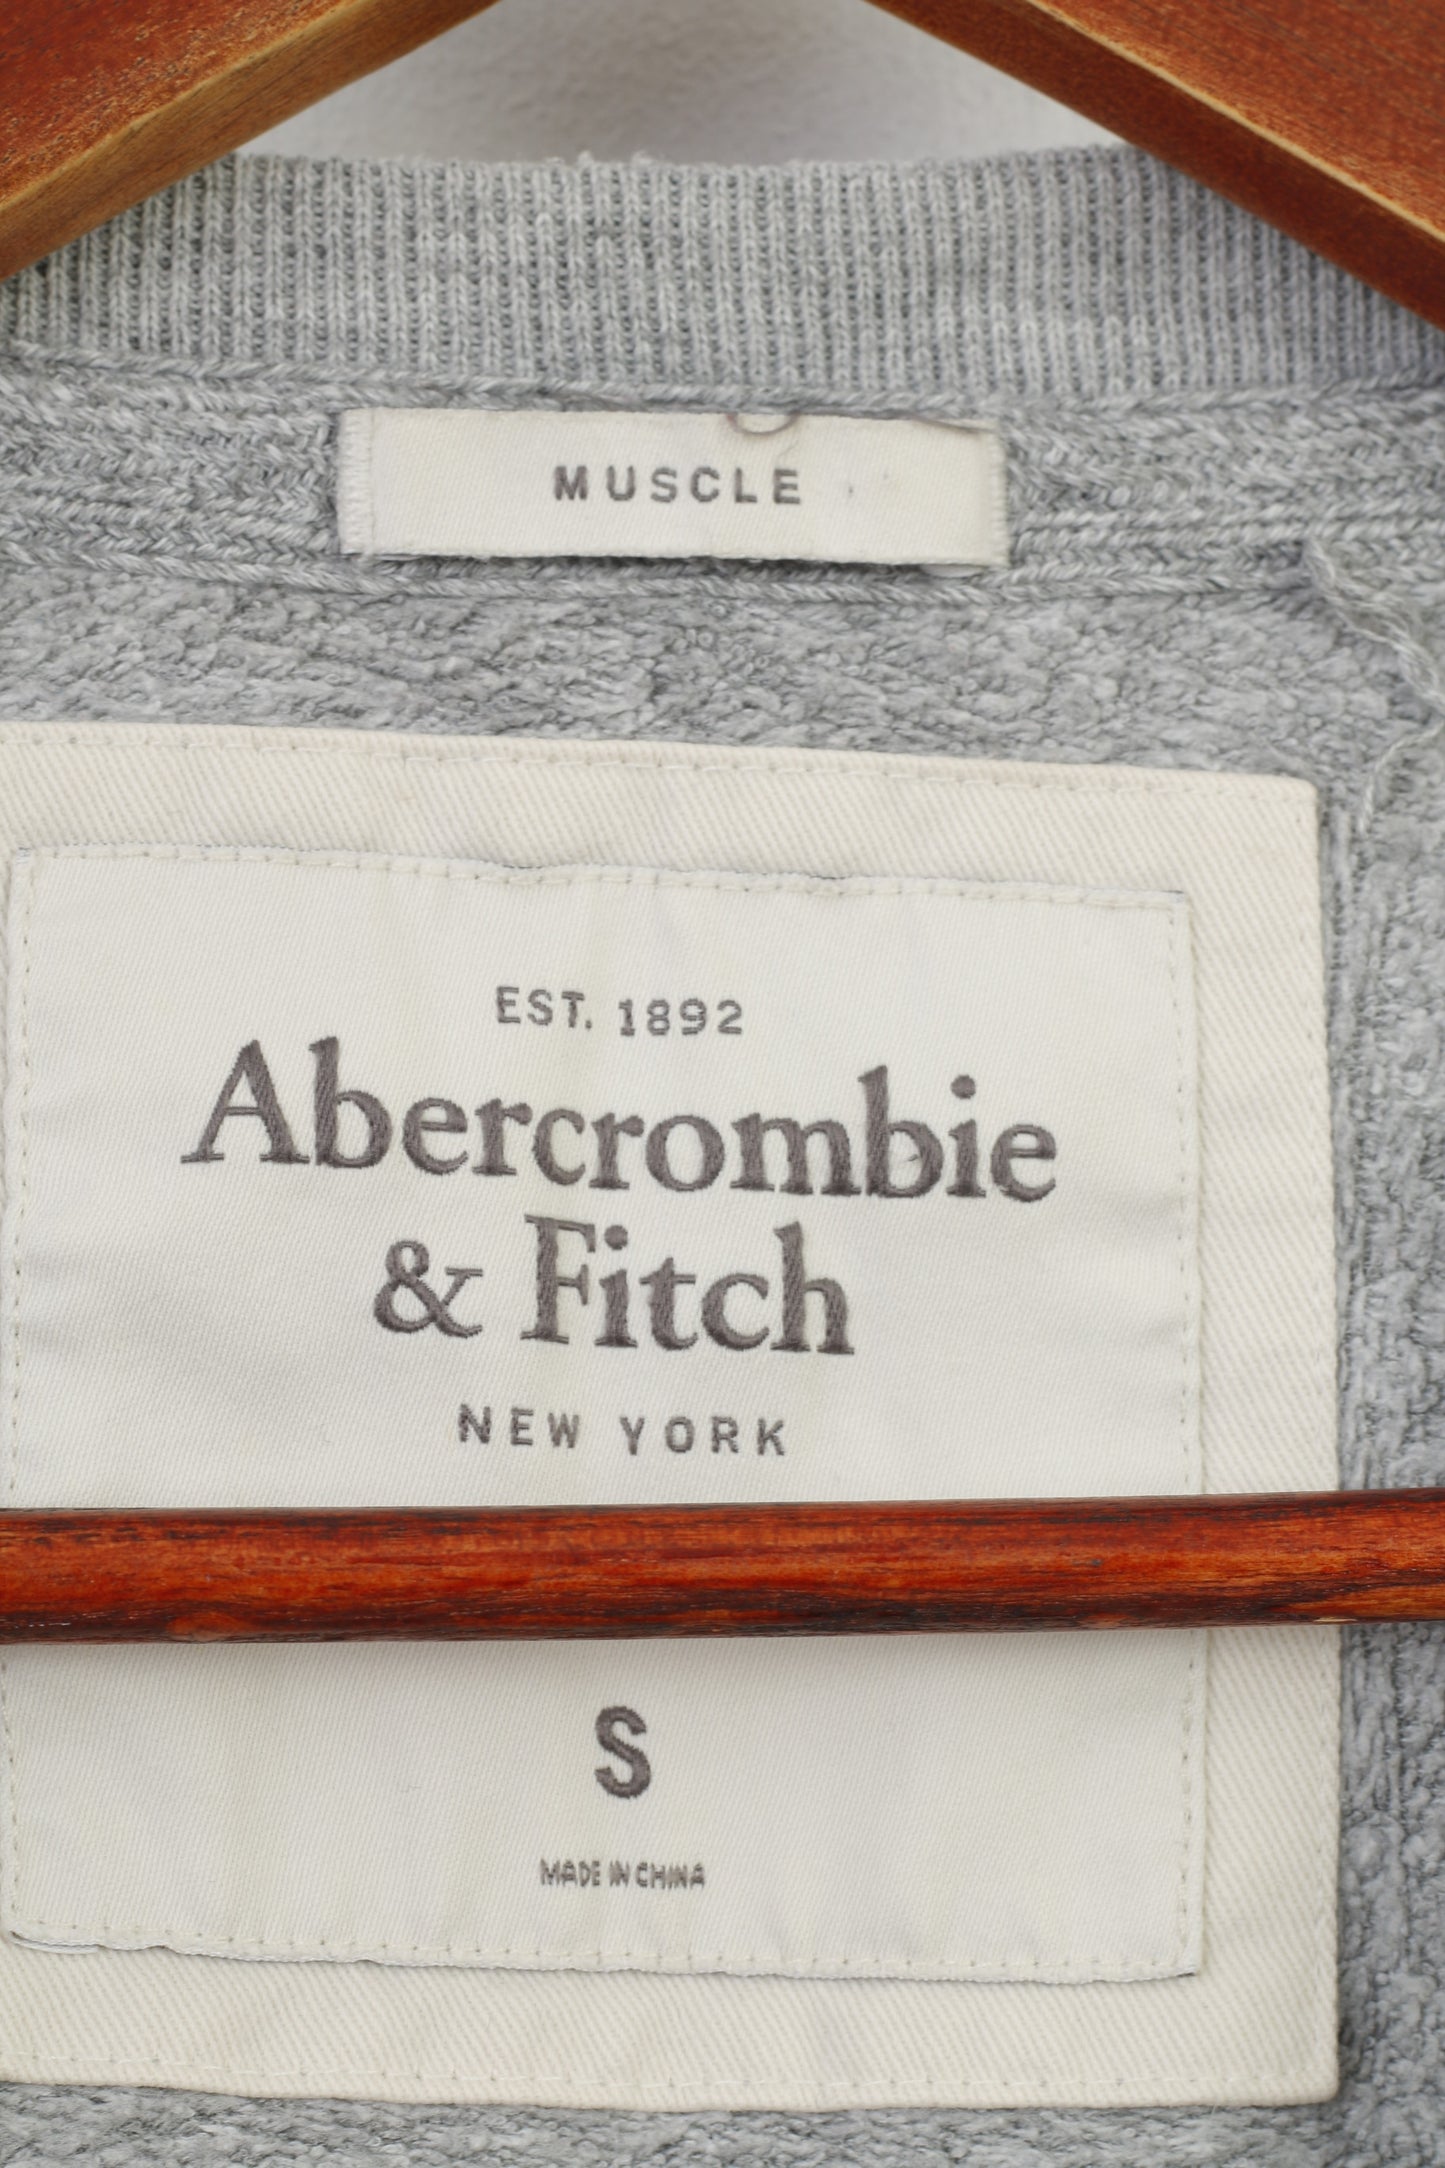 Abercrombie & Fitch Men S Sweatshirt Grey Muscle Cotton Crew Neck Embroidered Vintage Top